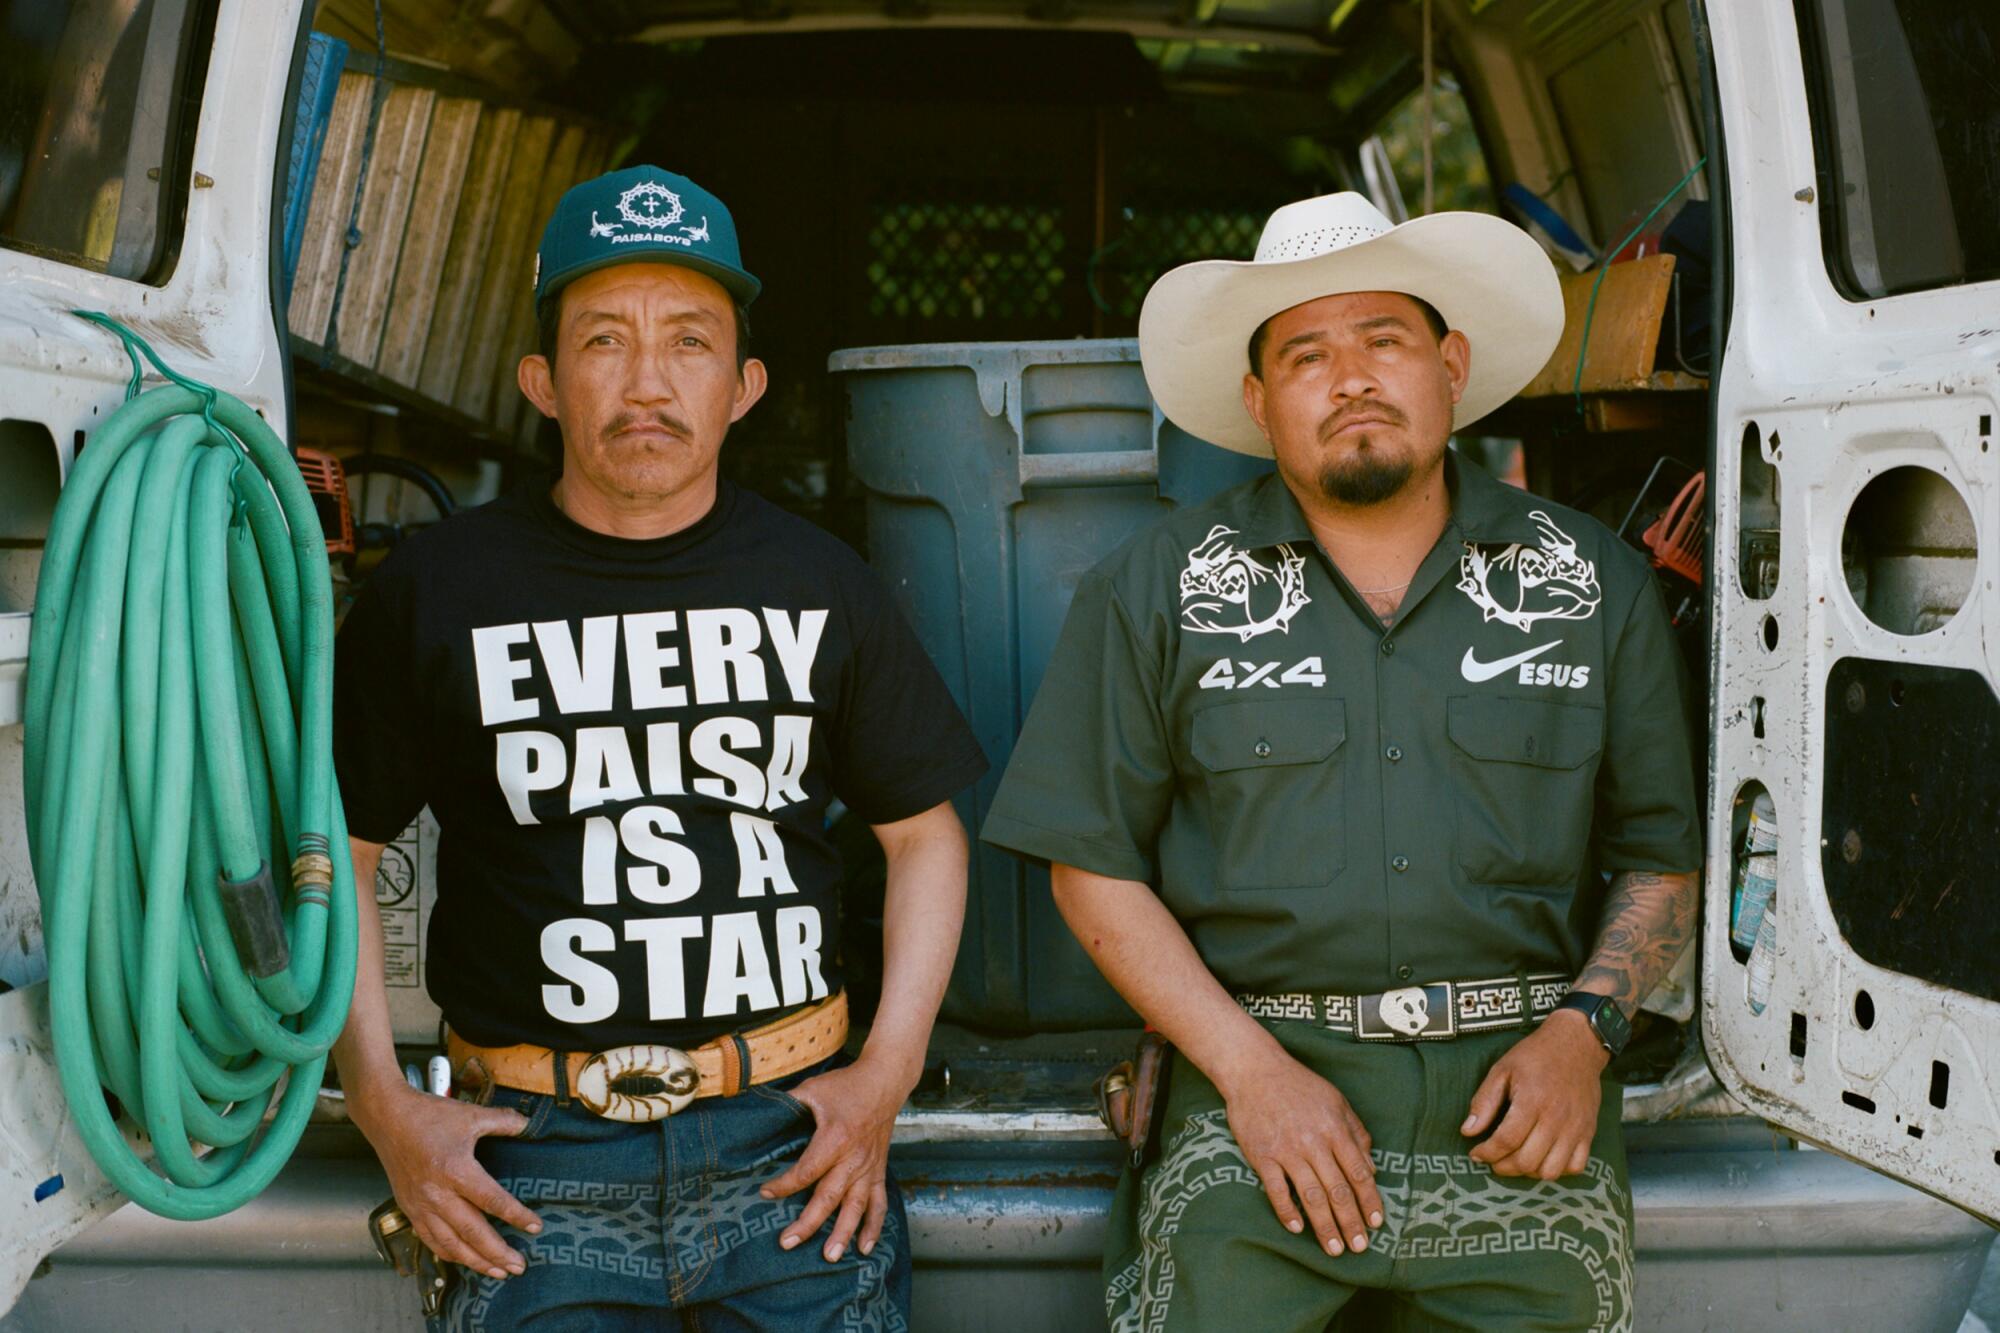 Photo of two landscapers standing in front of a truck, dressed in Paisaboys clothes.